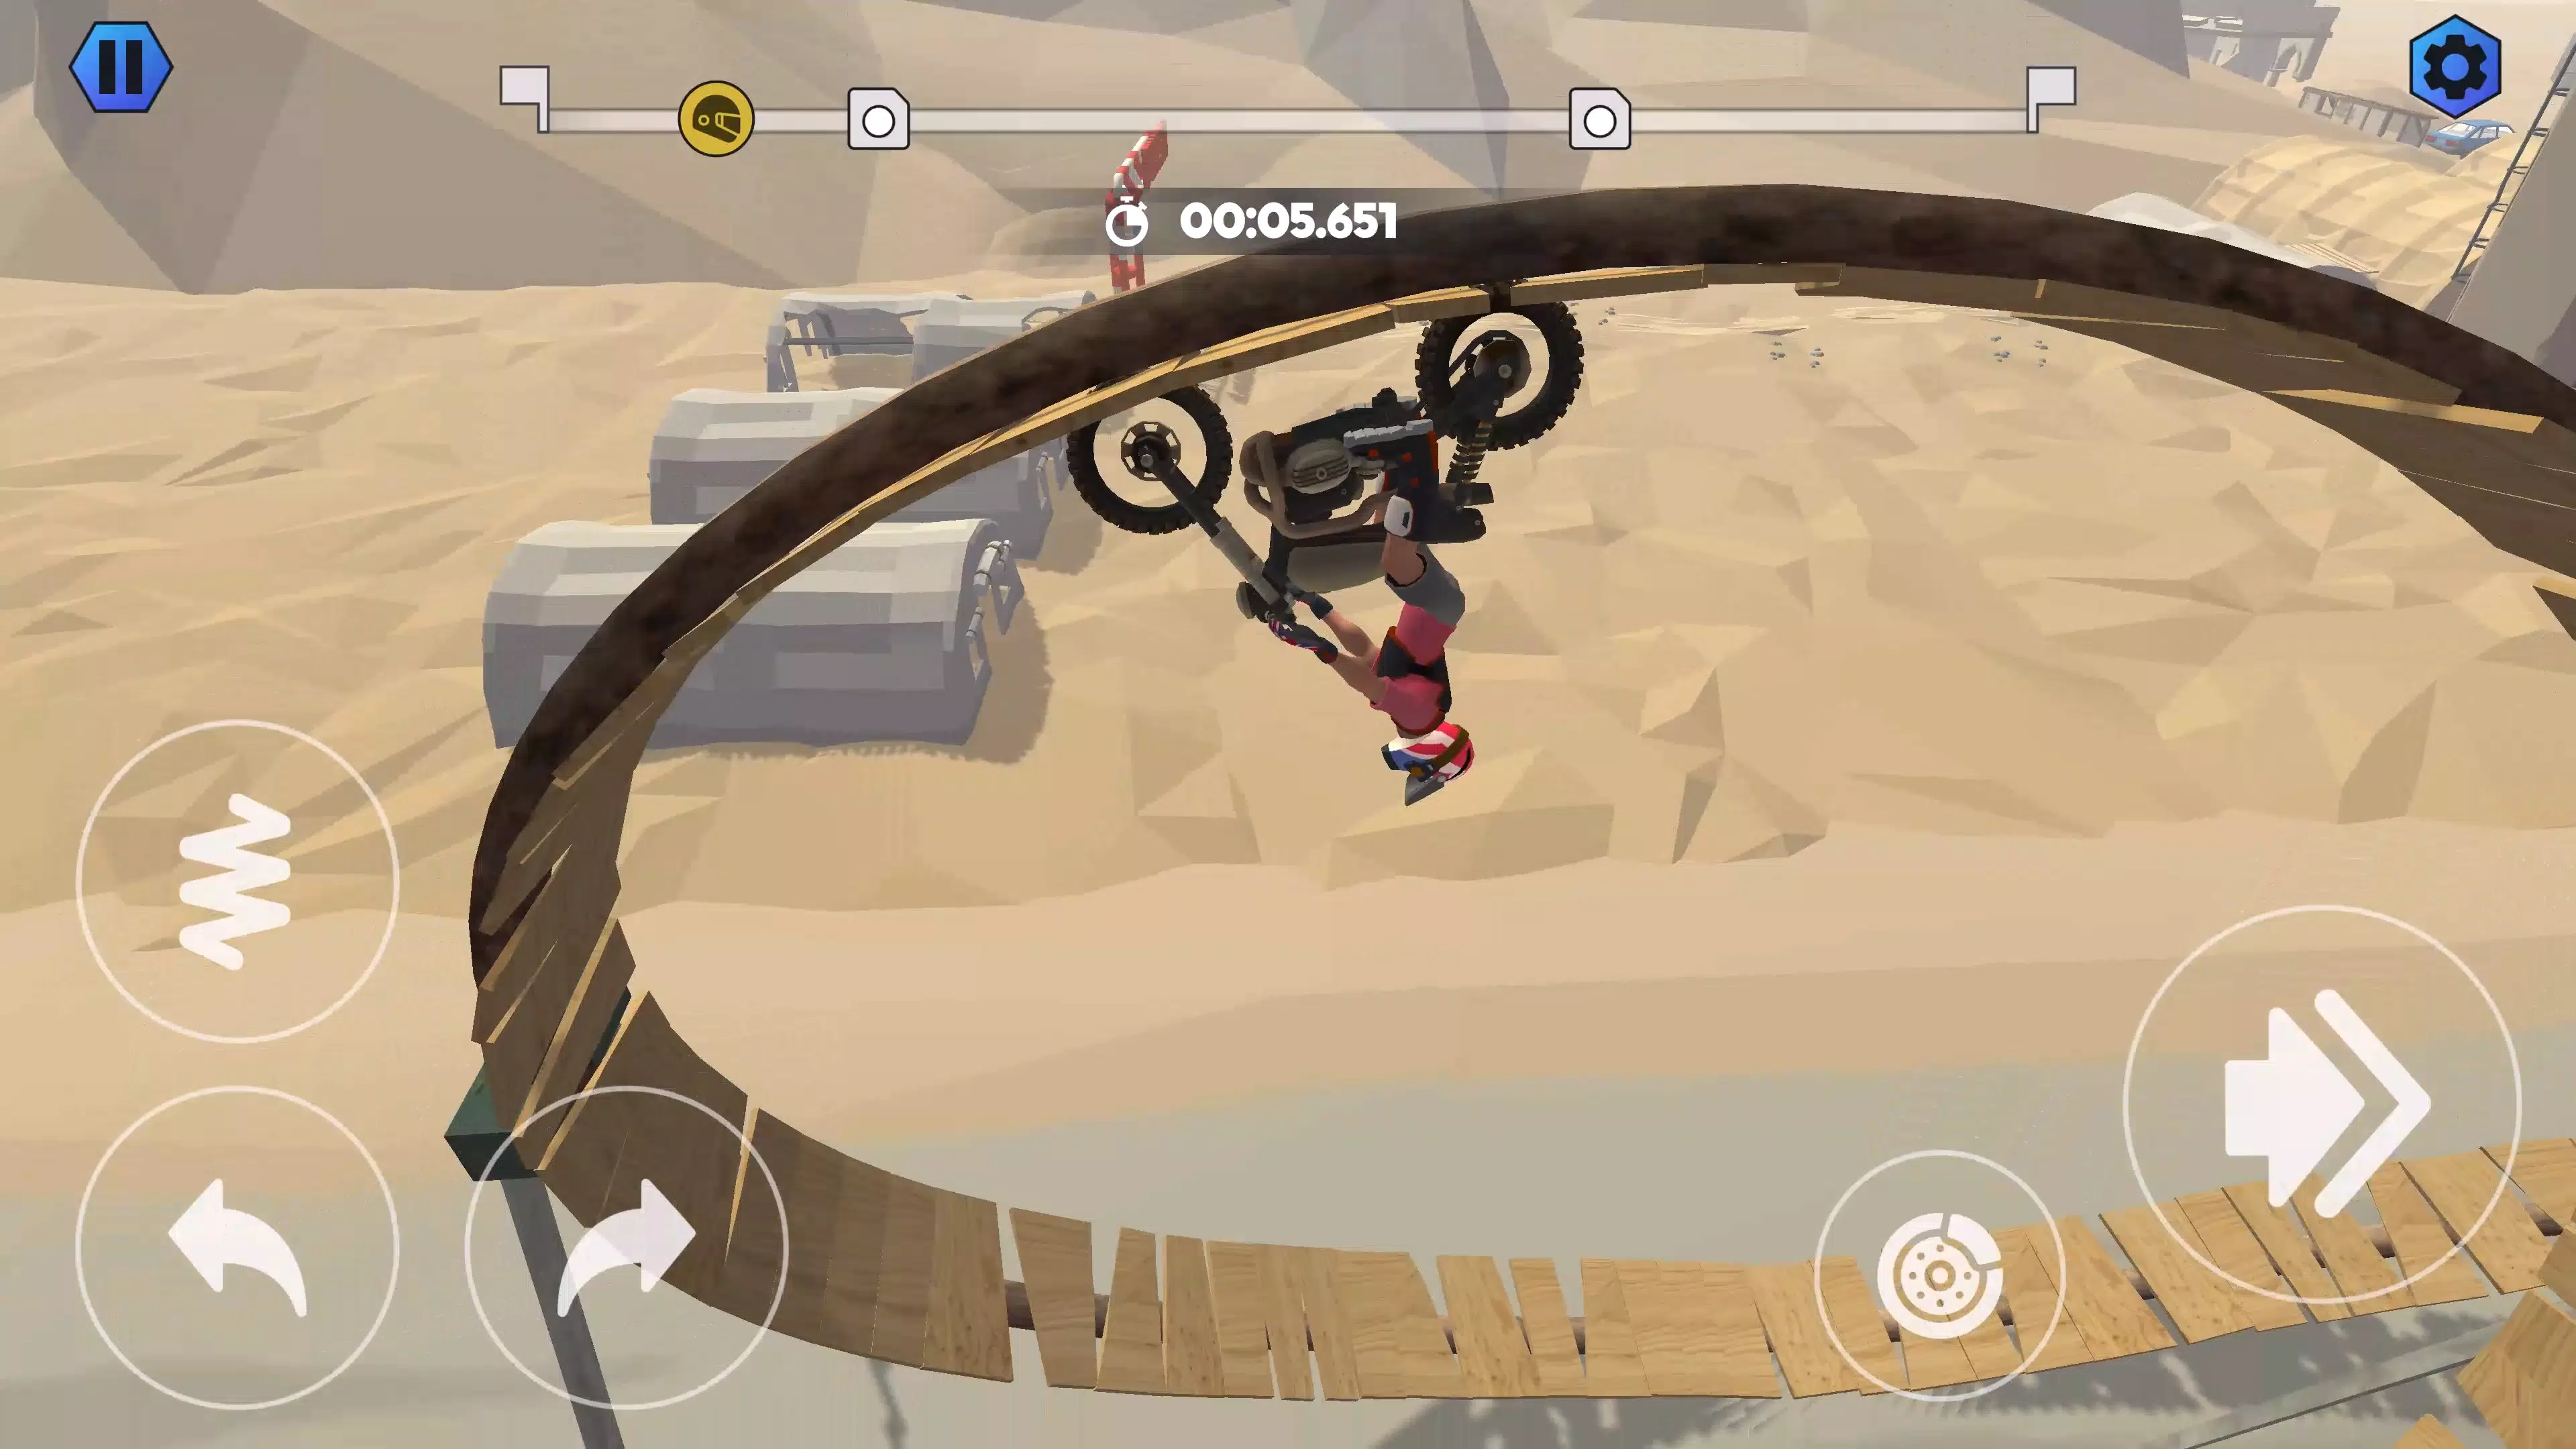 Download Trial Xtreme Free 1.31 APK For Android